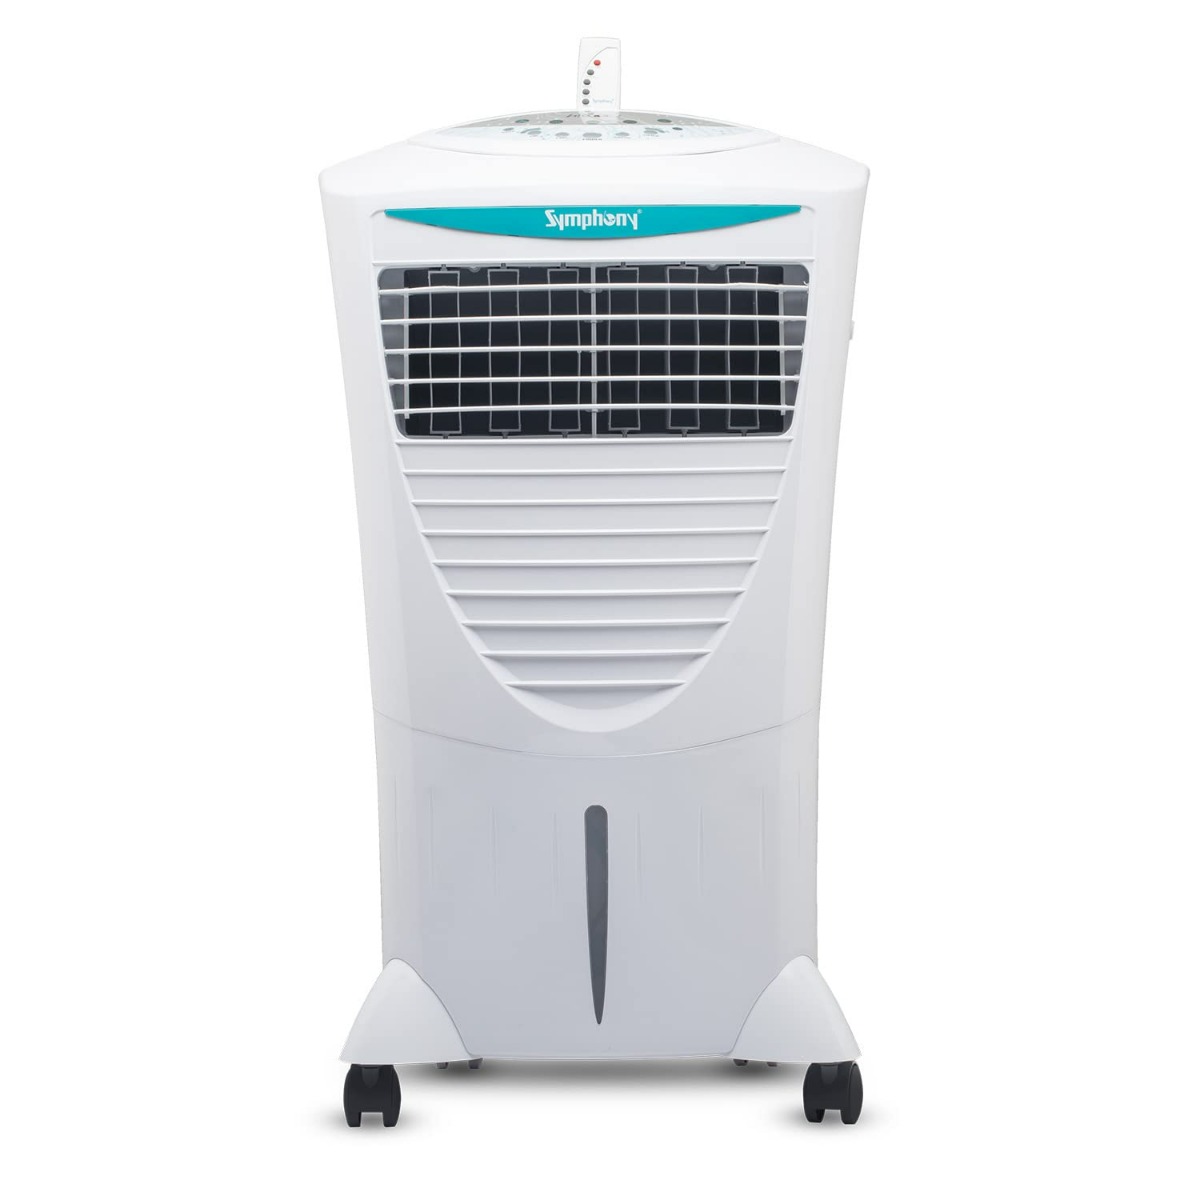 Symphony Hicool i Personal Air Cooler with Remote with Honeycomb Pad, Powerful Blower, i-Pure Technology and Low Power Consumption (31L, White) - HICOOL i